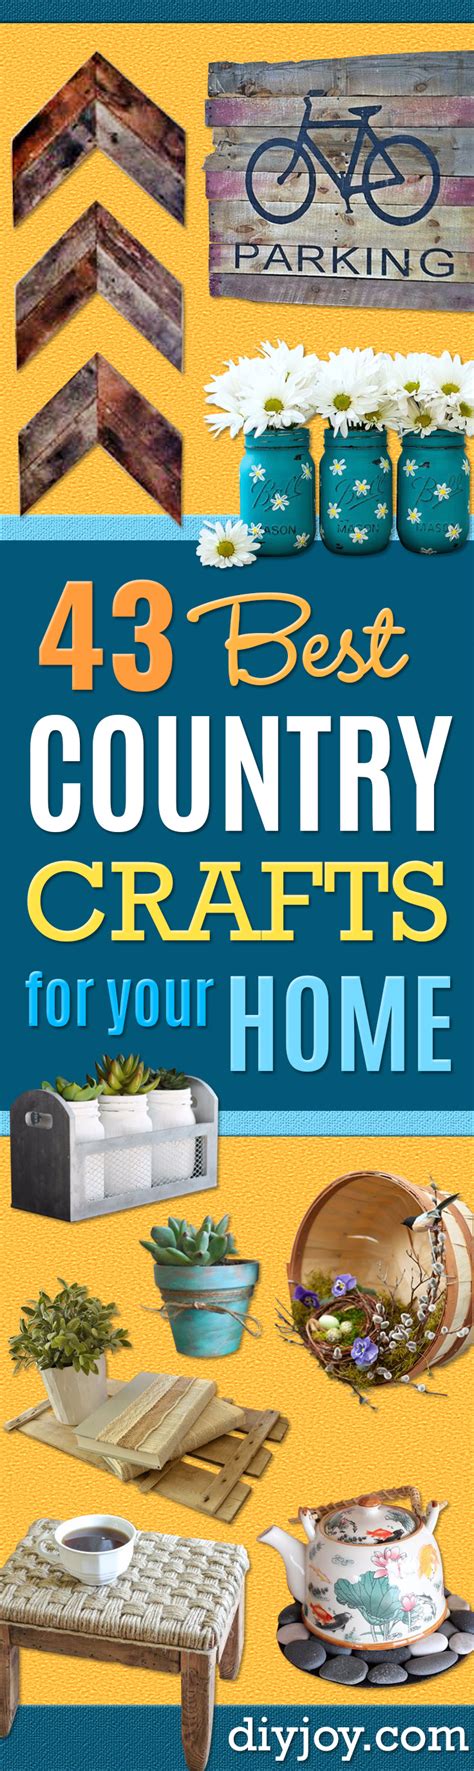 43 Best Country Crafts For Your Home